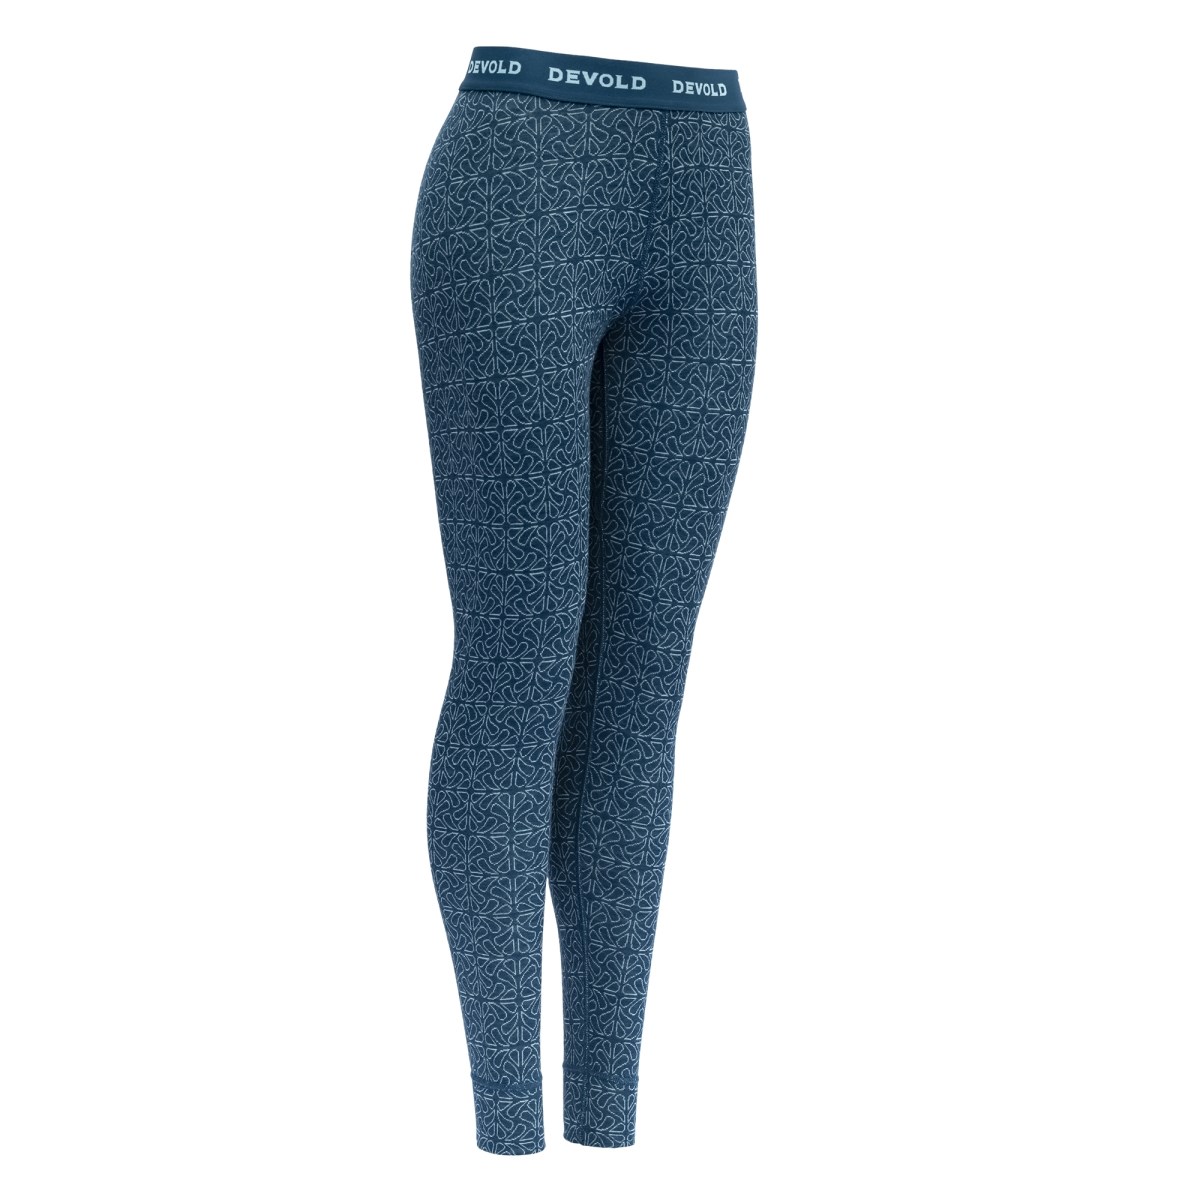 Spodky Devold Duo Active Woman Long Johns flood Devold 10025328 L-11